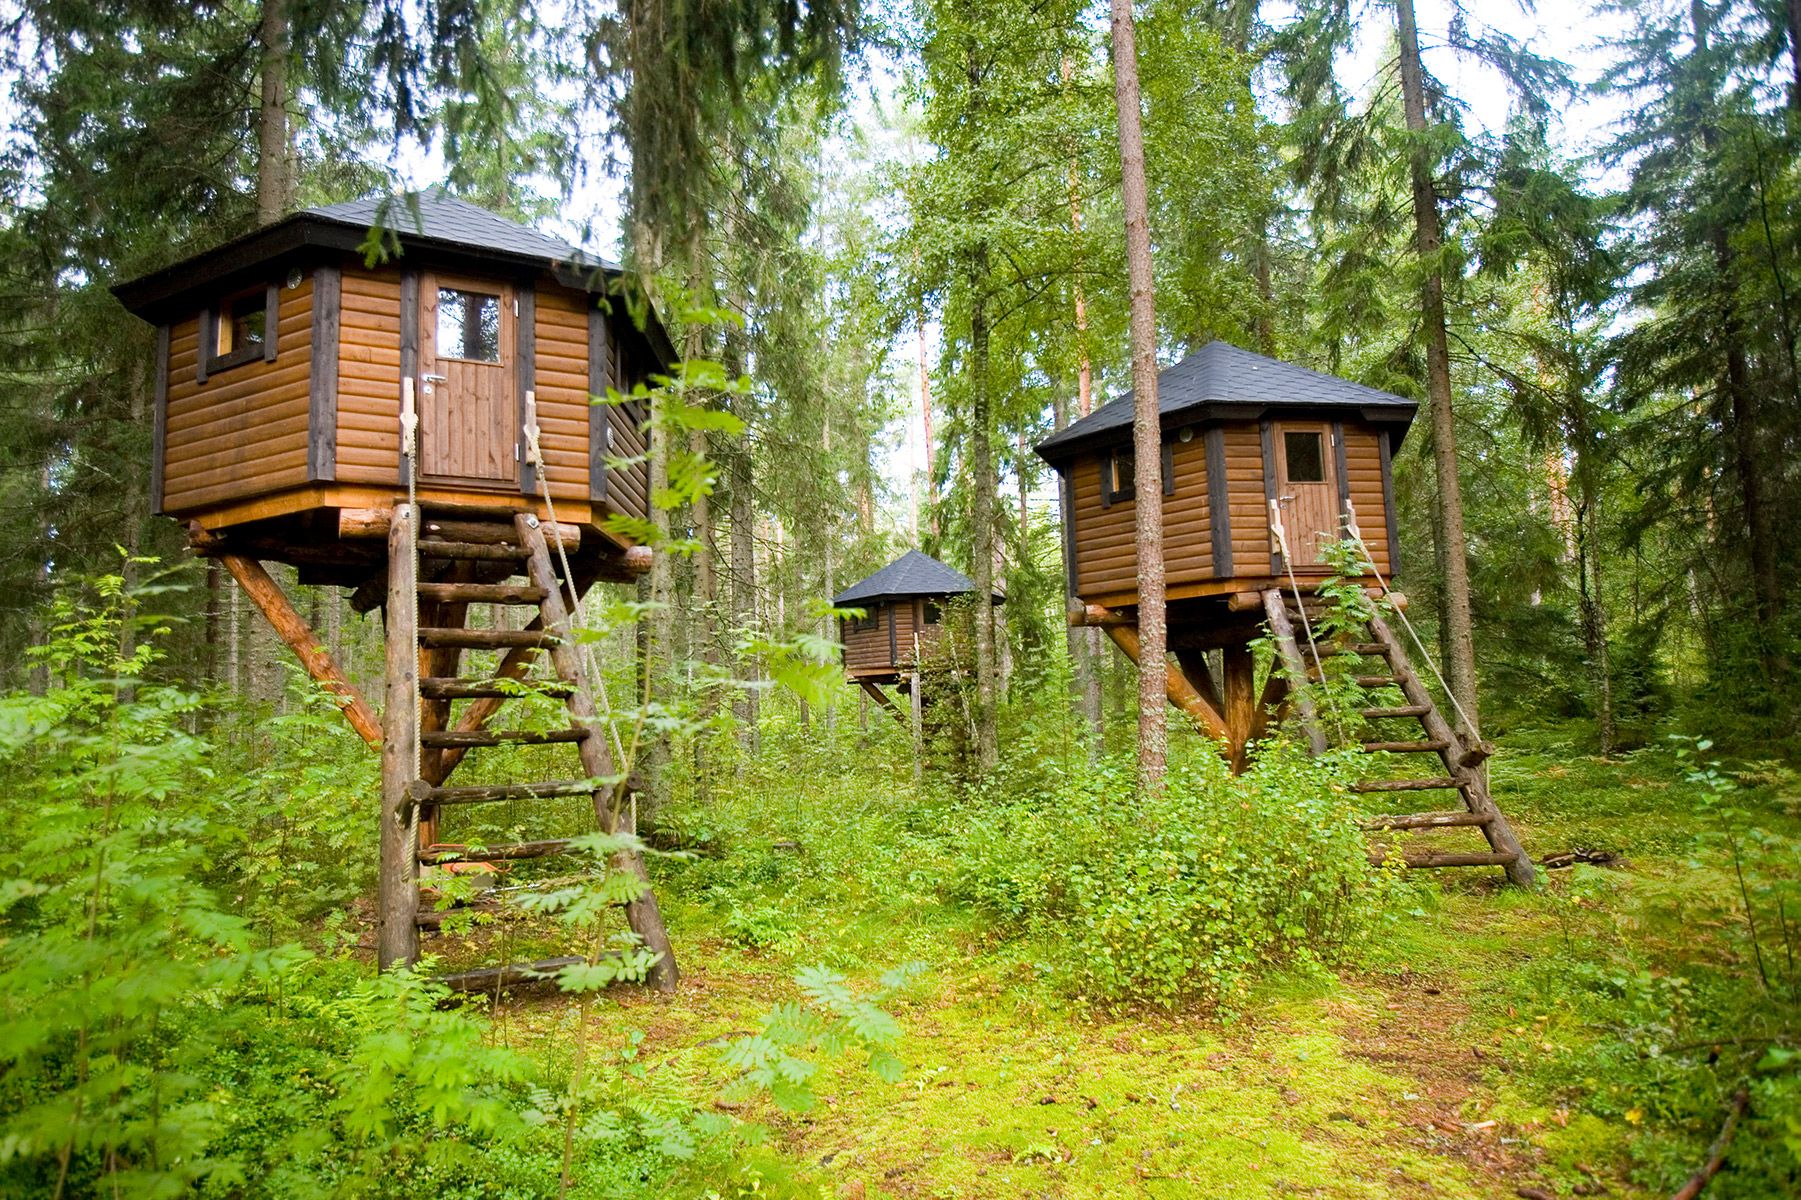 Three hexagonal huts stand tall in the forest at Storfinnhova.